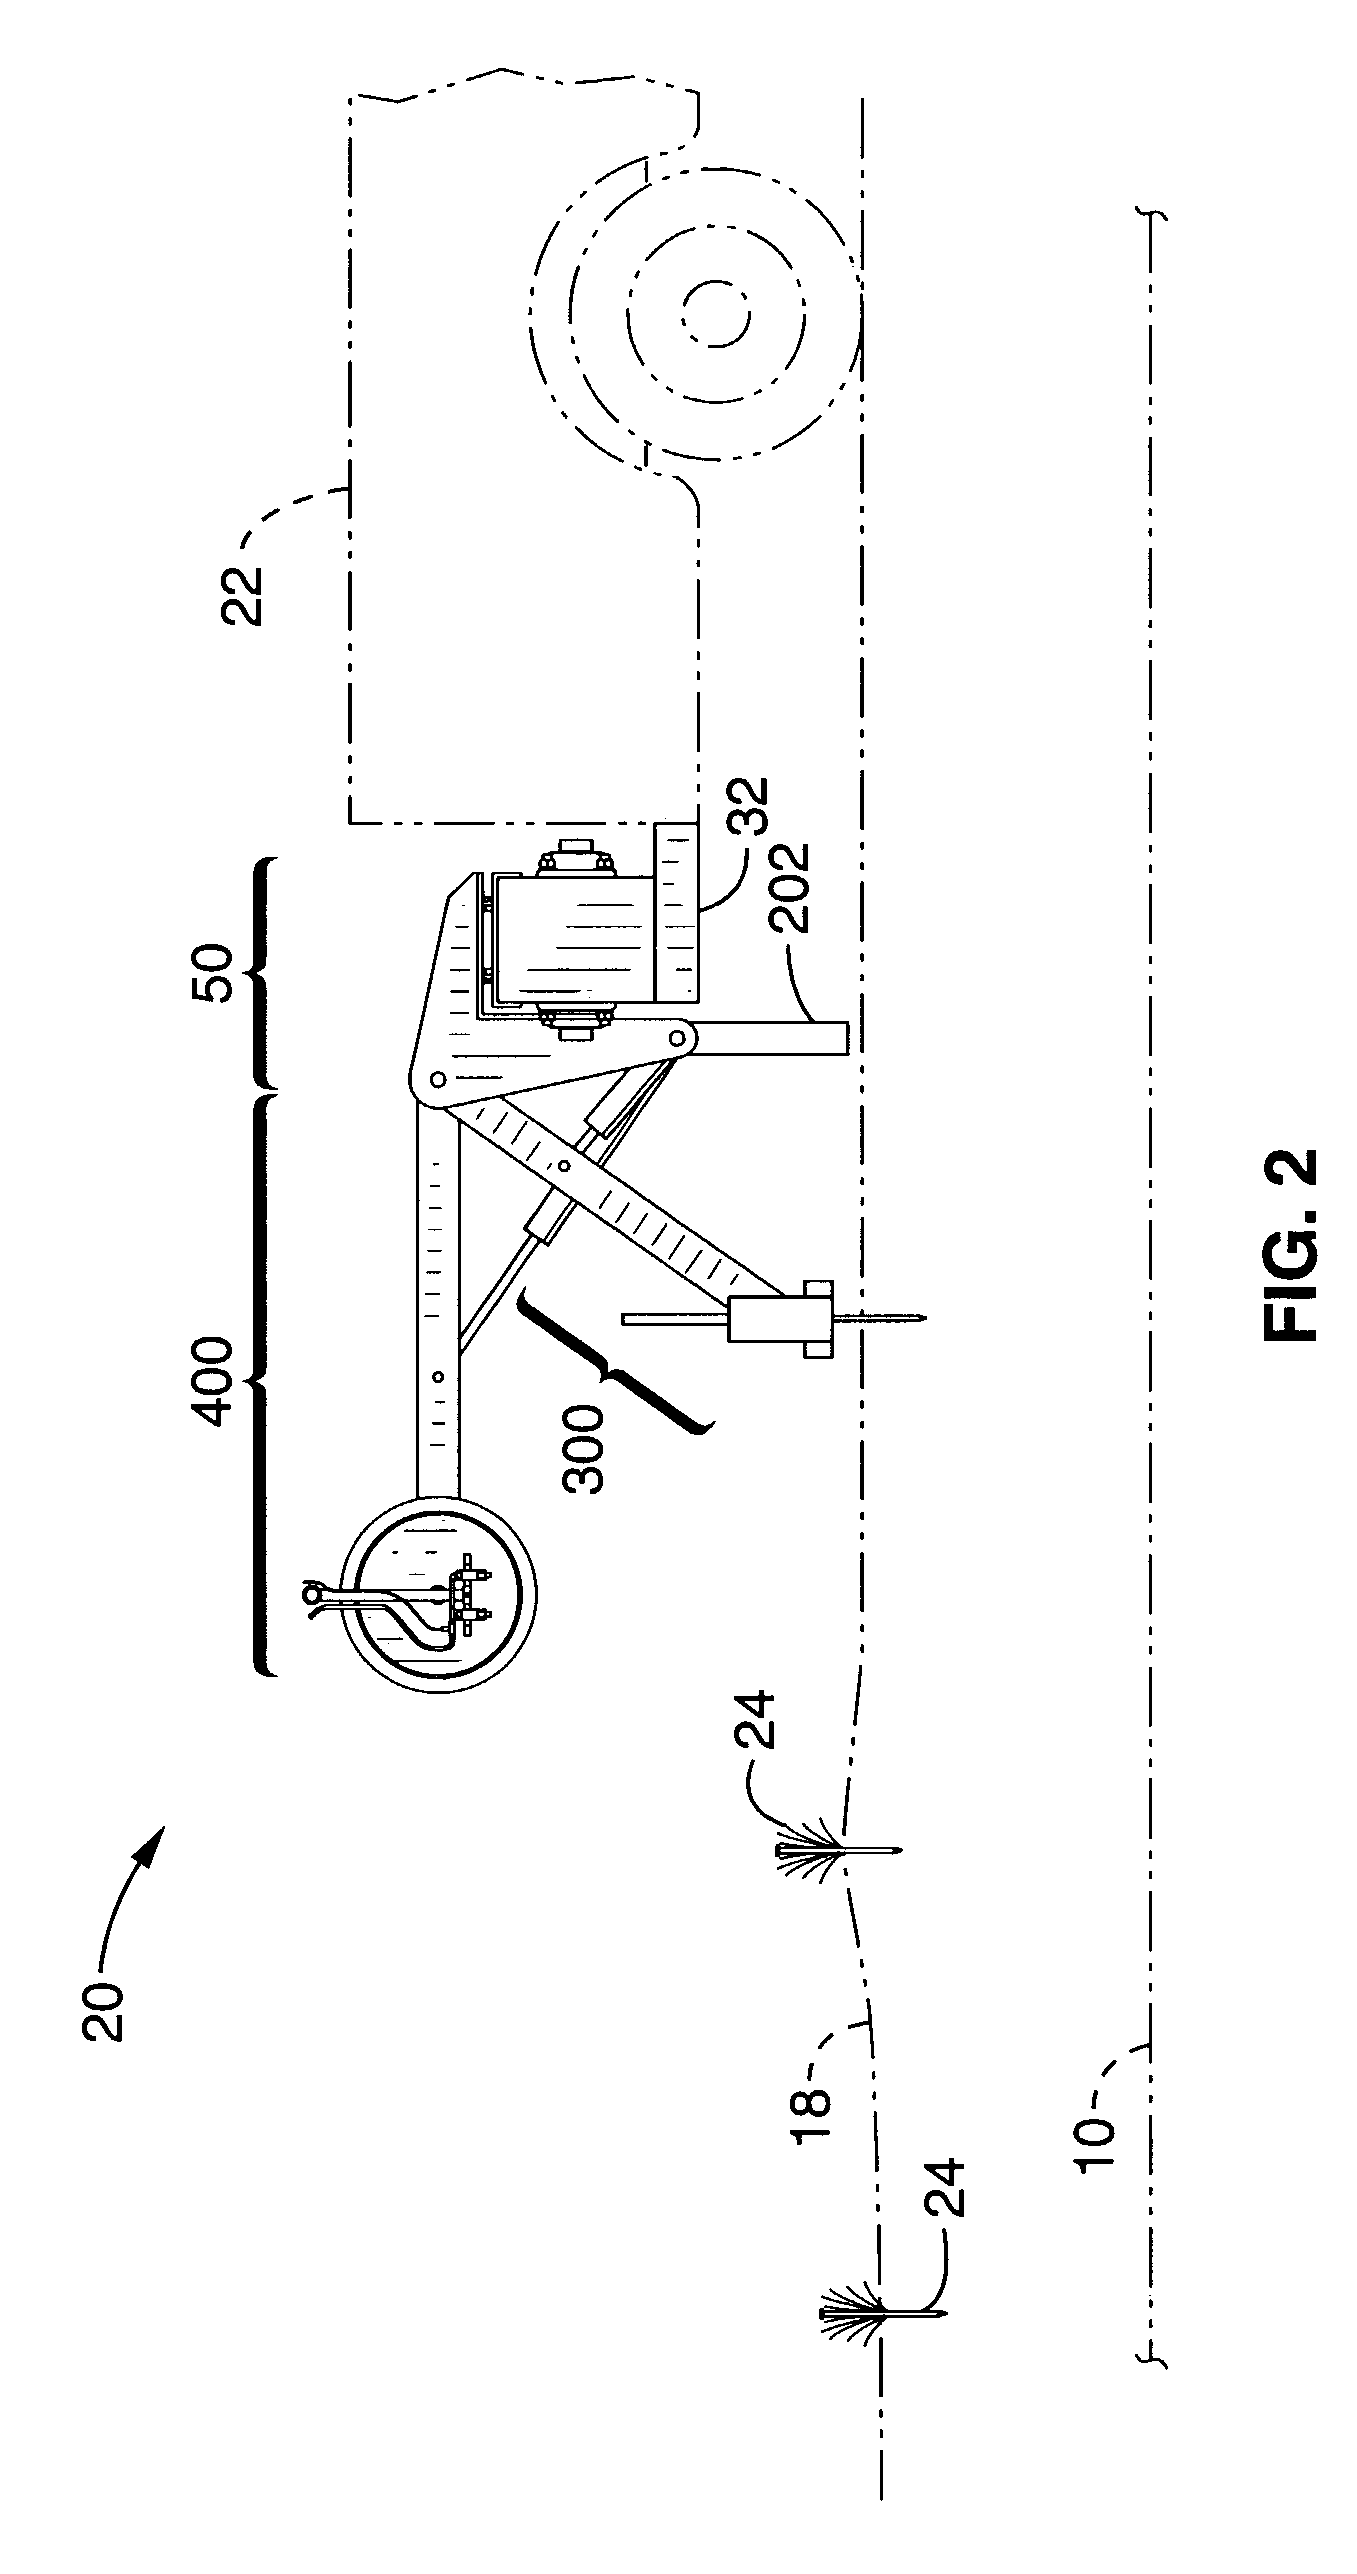 Apparatus and method for locating and marking an underground utility